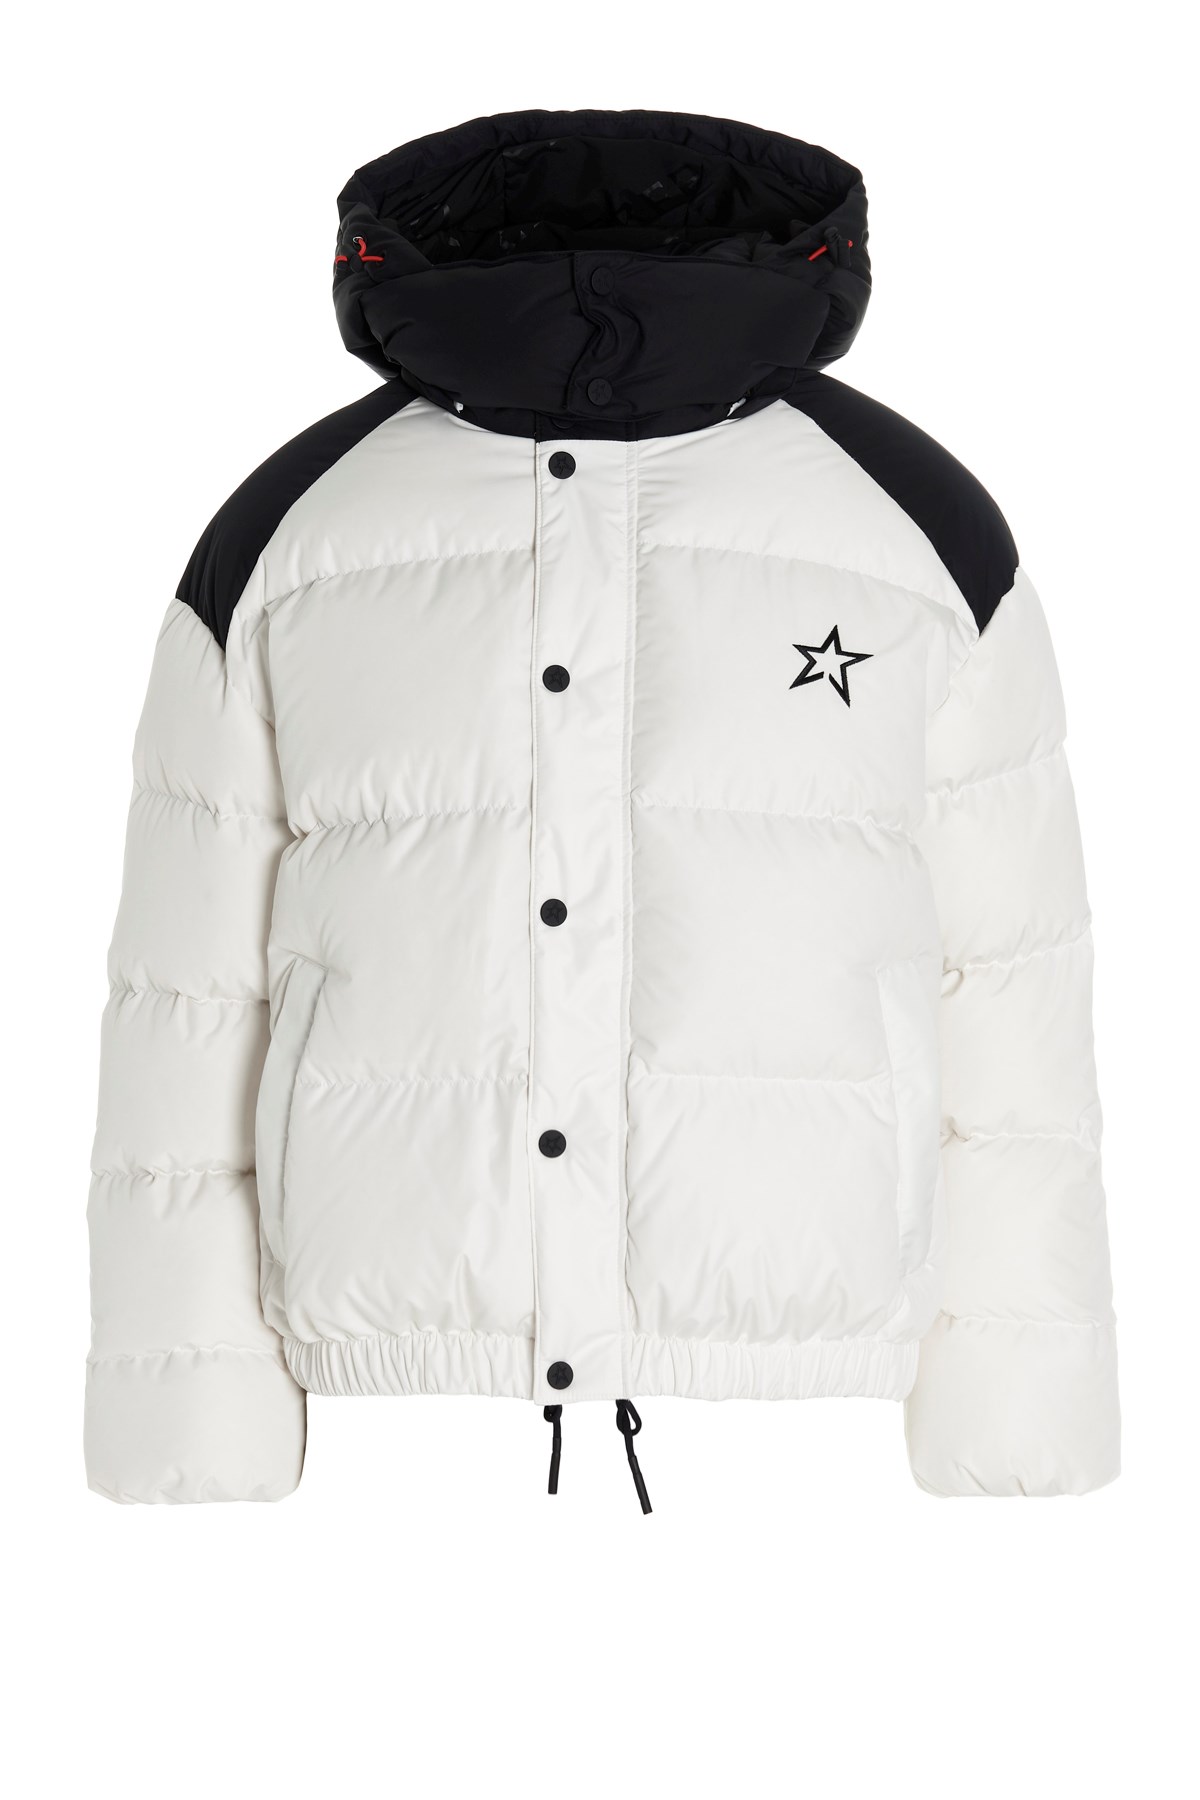 PERFECT MOMENT 'Moment Puffer’ Down Jacket